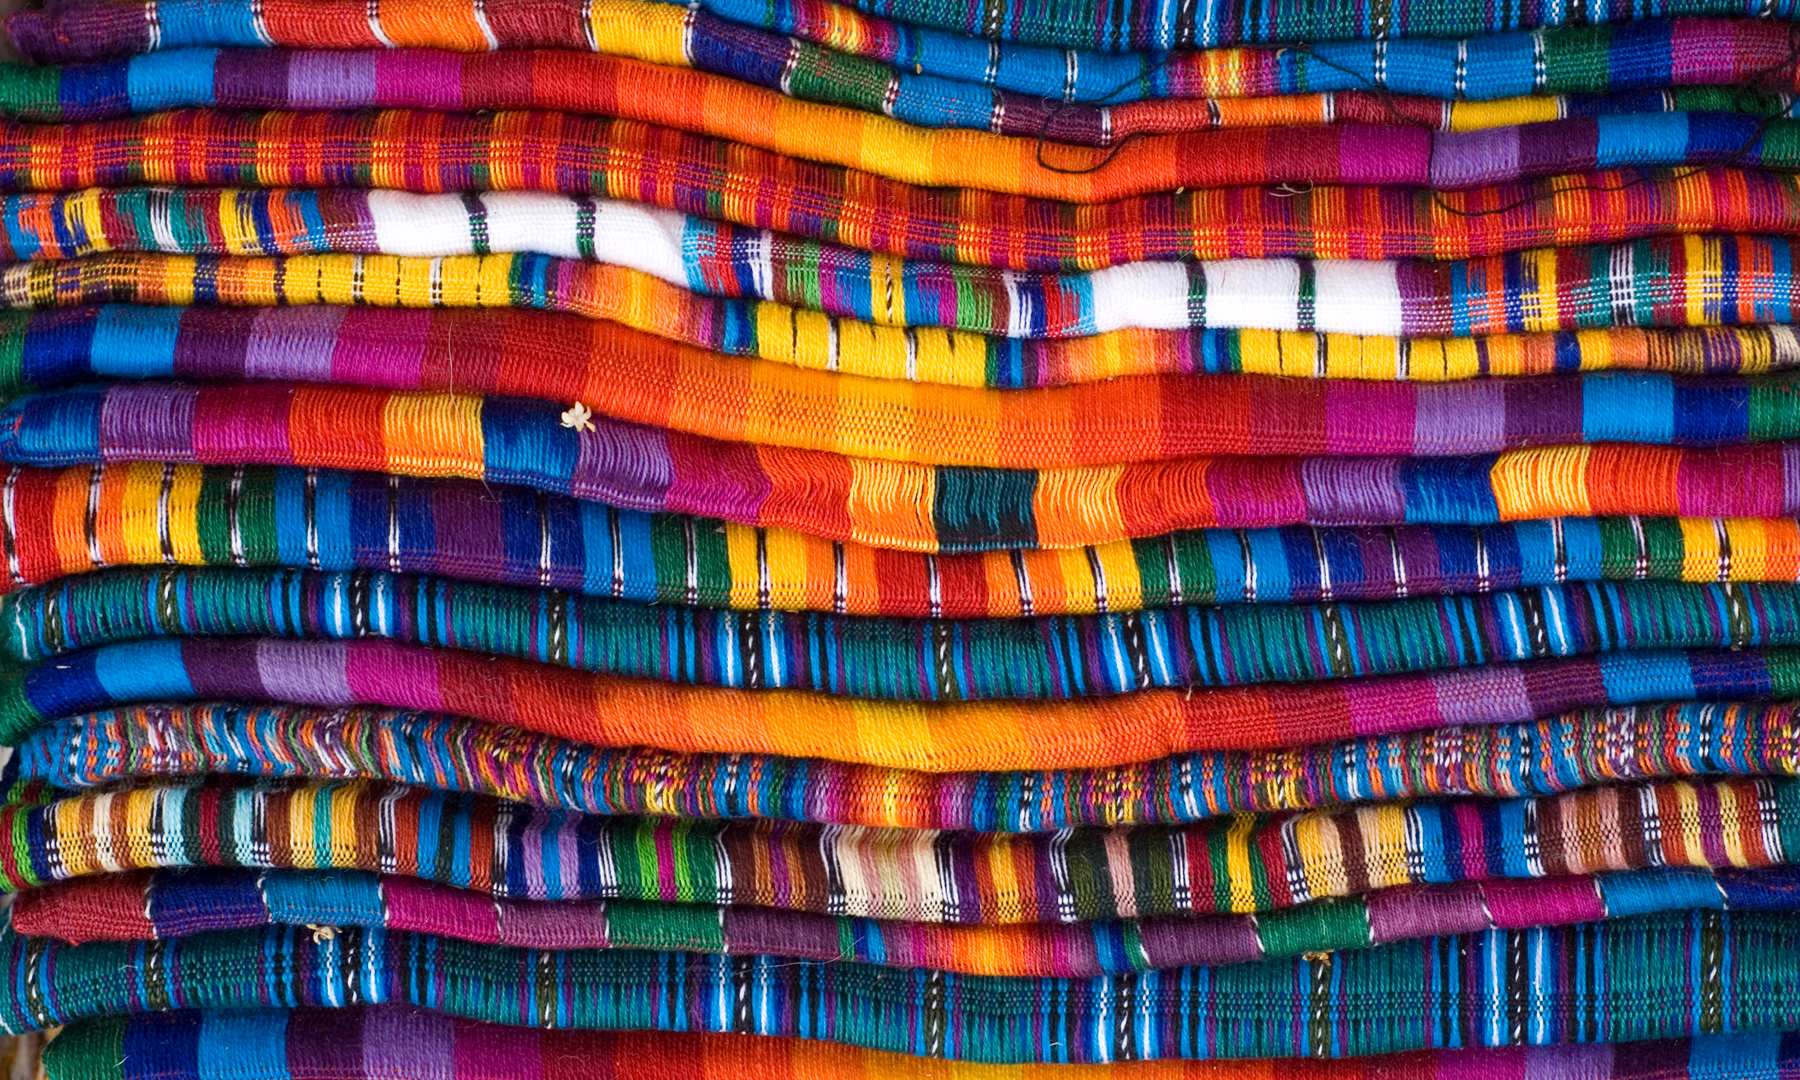 Colorful woven blankets